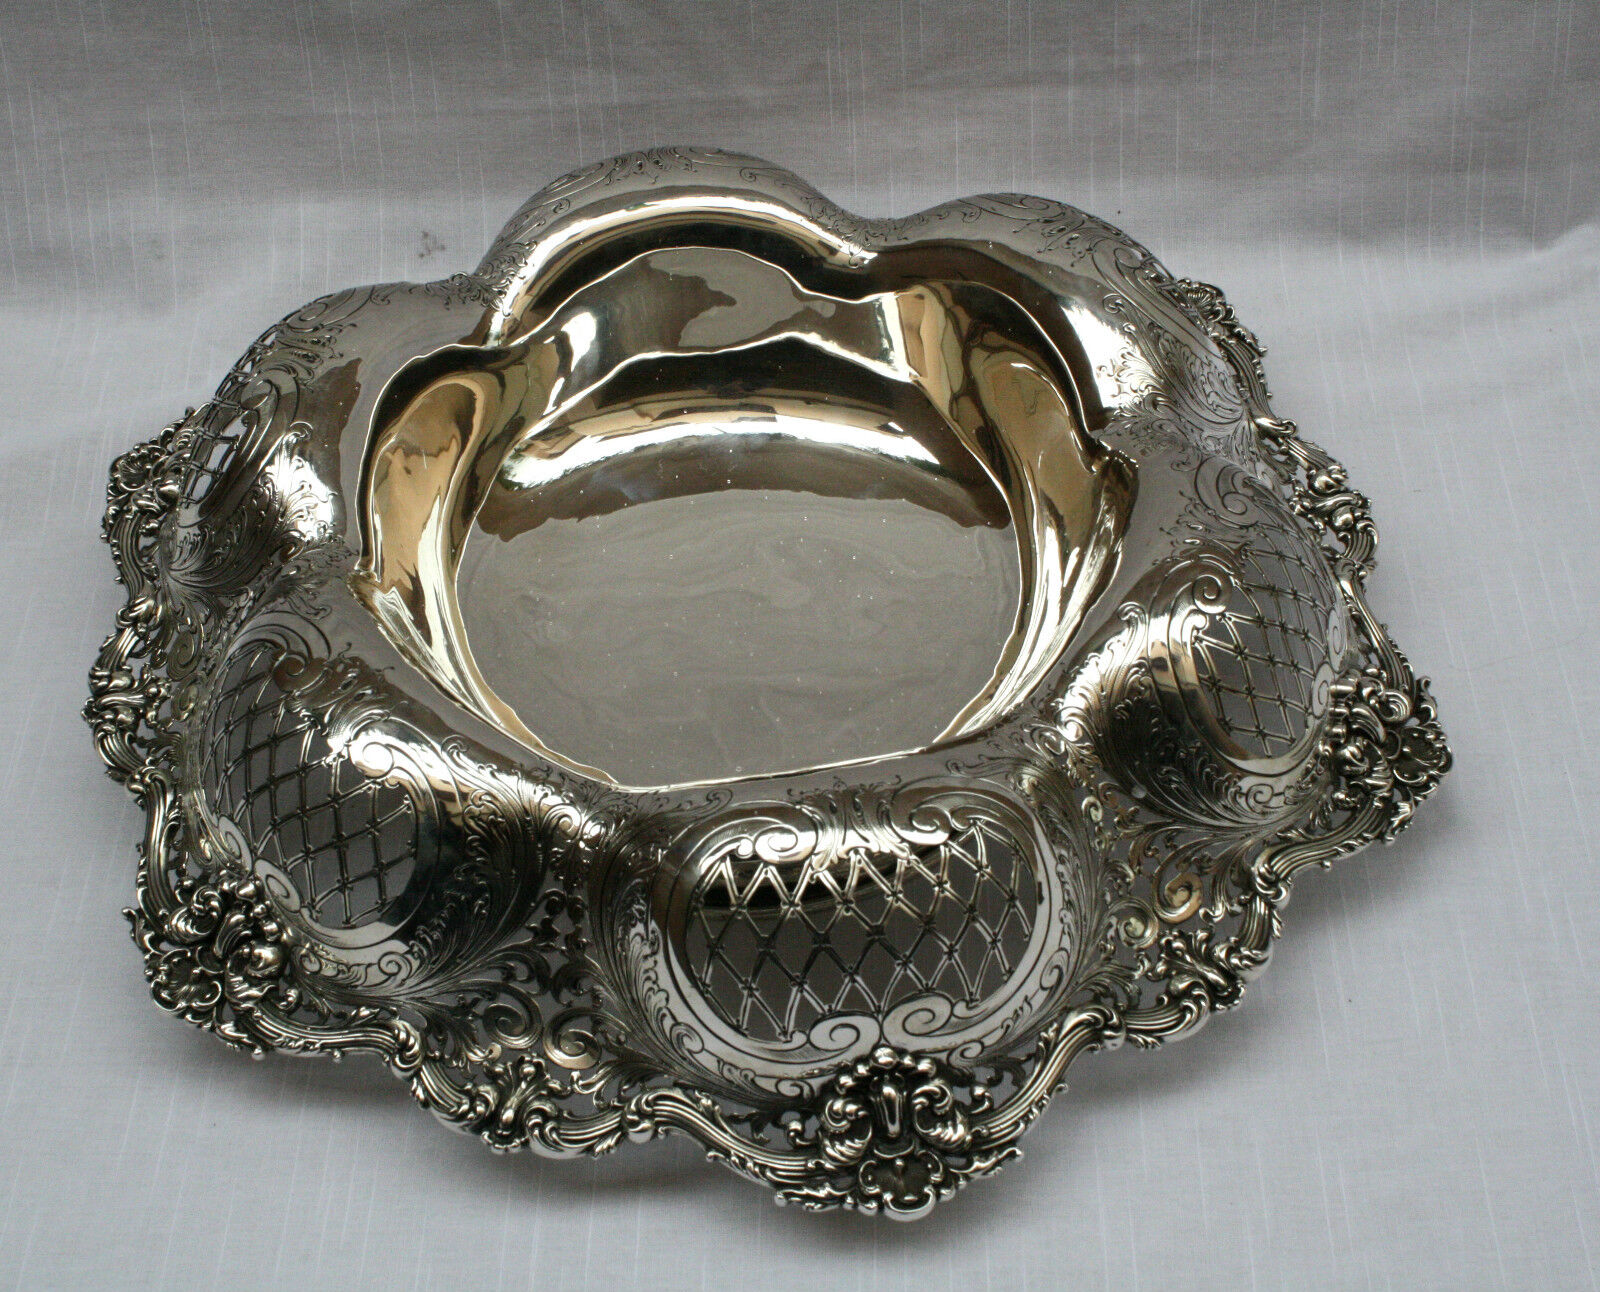 MAGNIFICENT 1900 REPOSE STERLING  LARGE CENTER PIECE BY WRIGHTHK